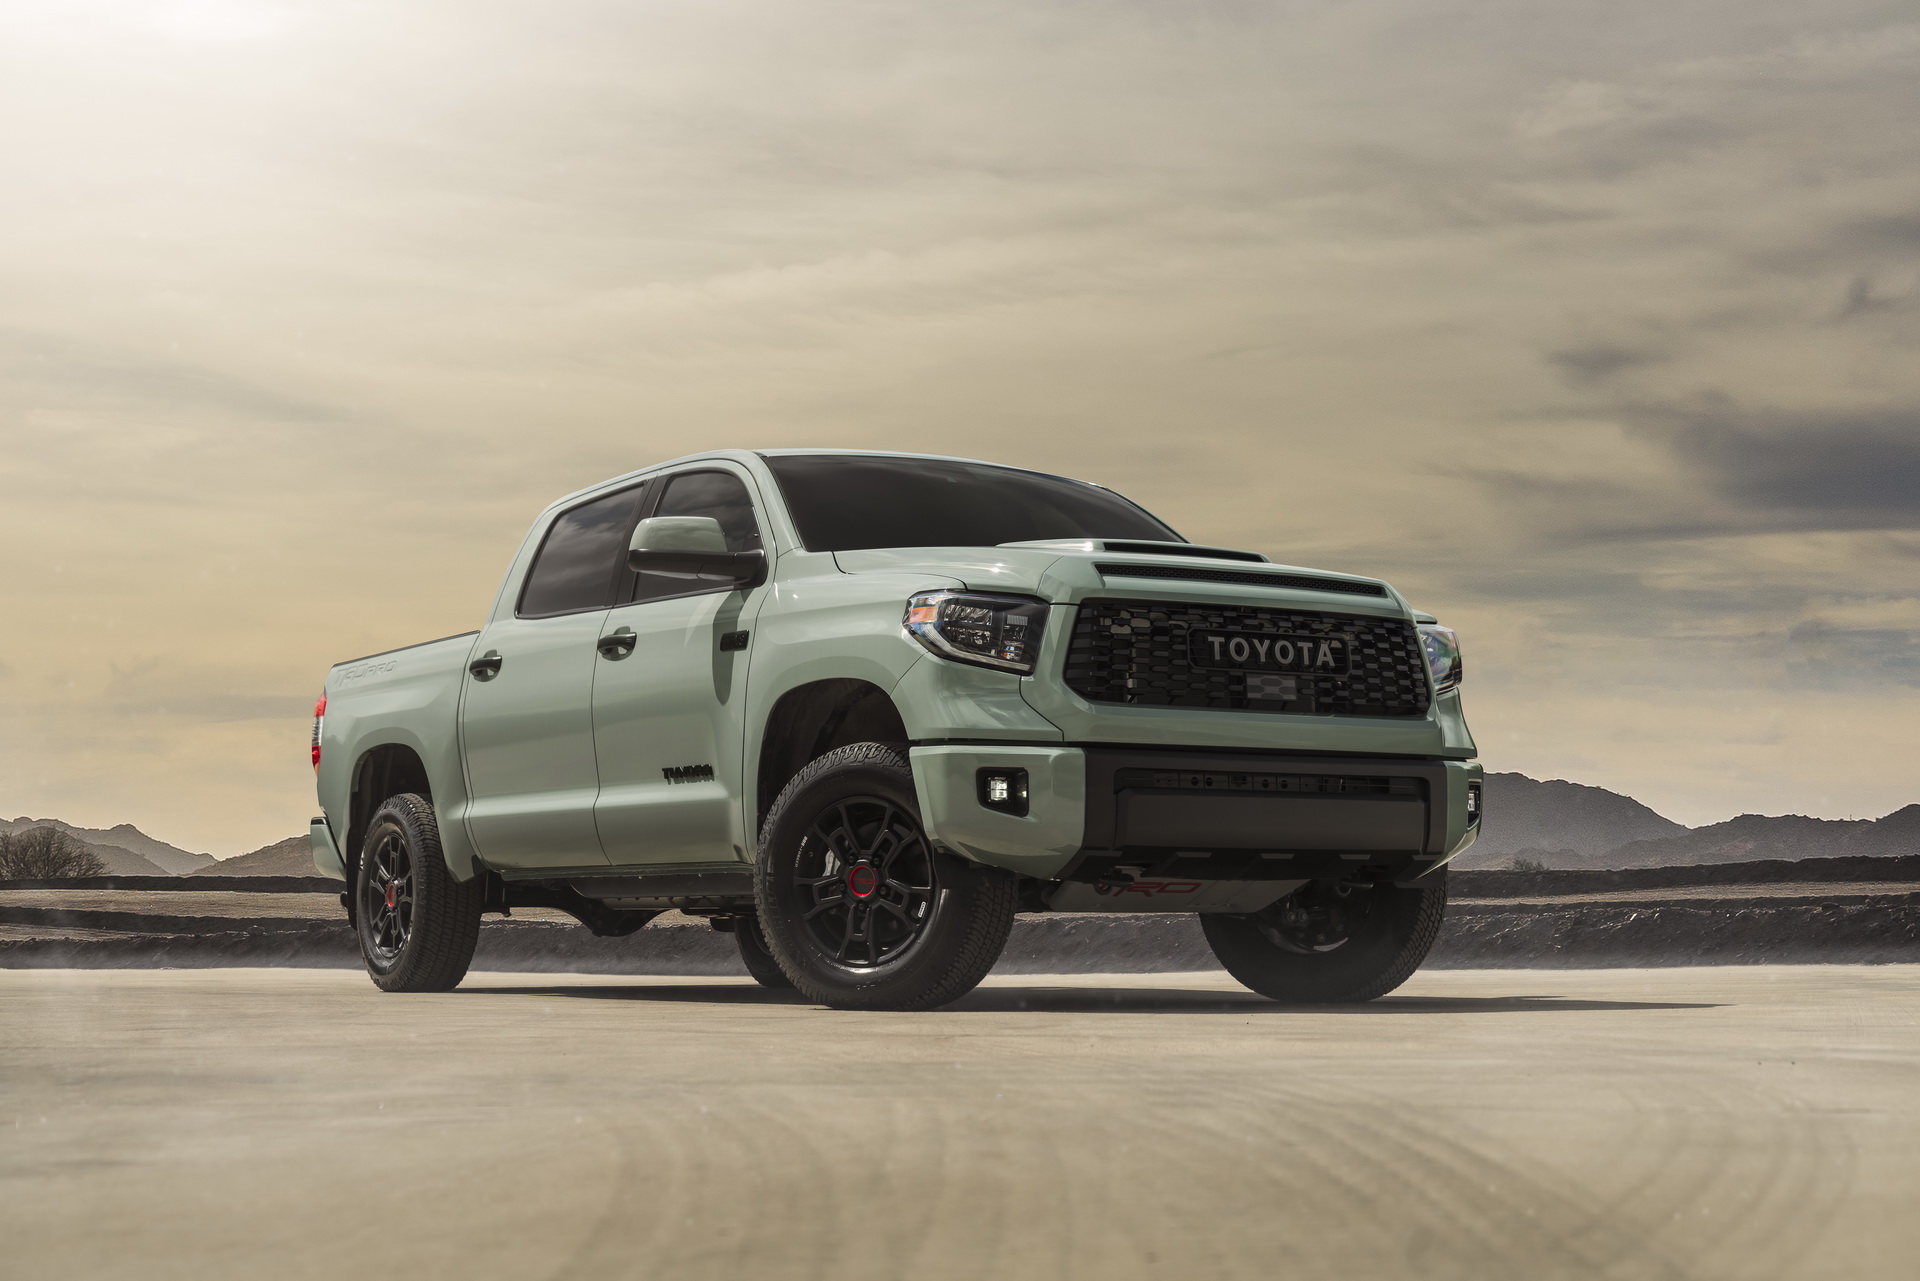 179 2019 toyota tundra trd pro accessories for Touring